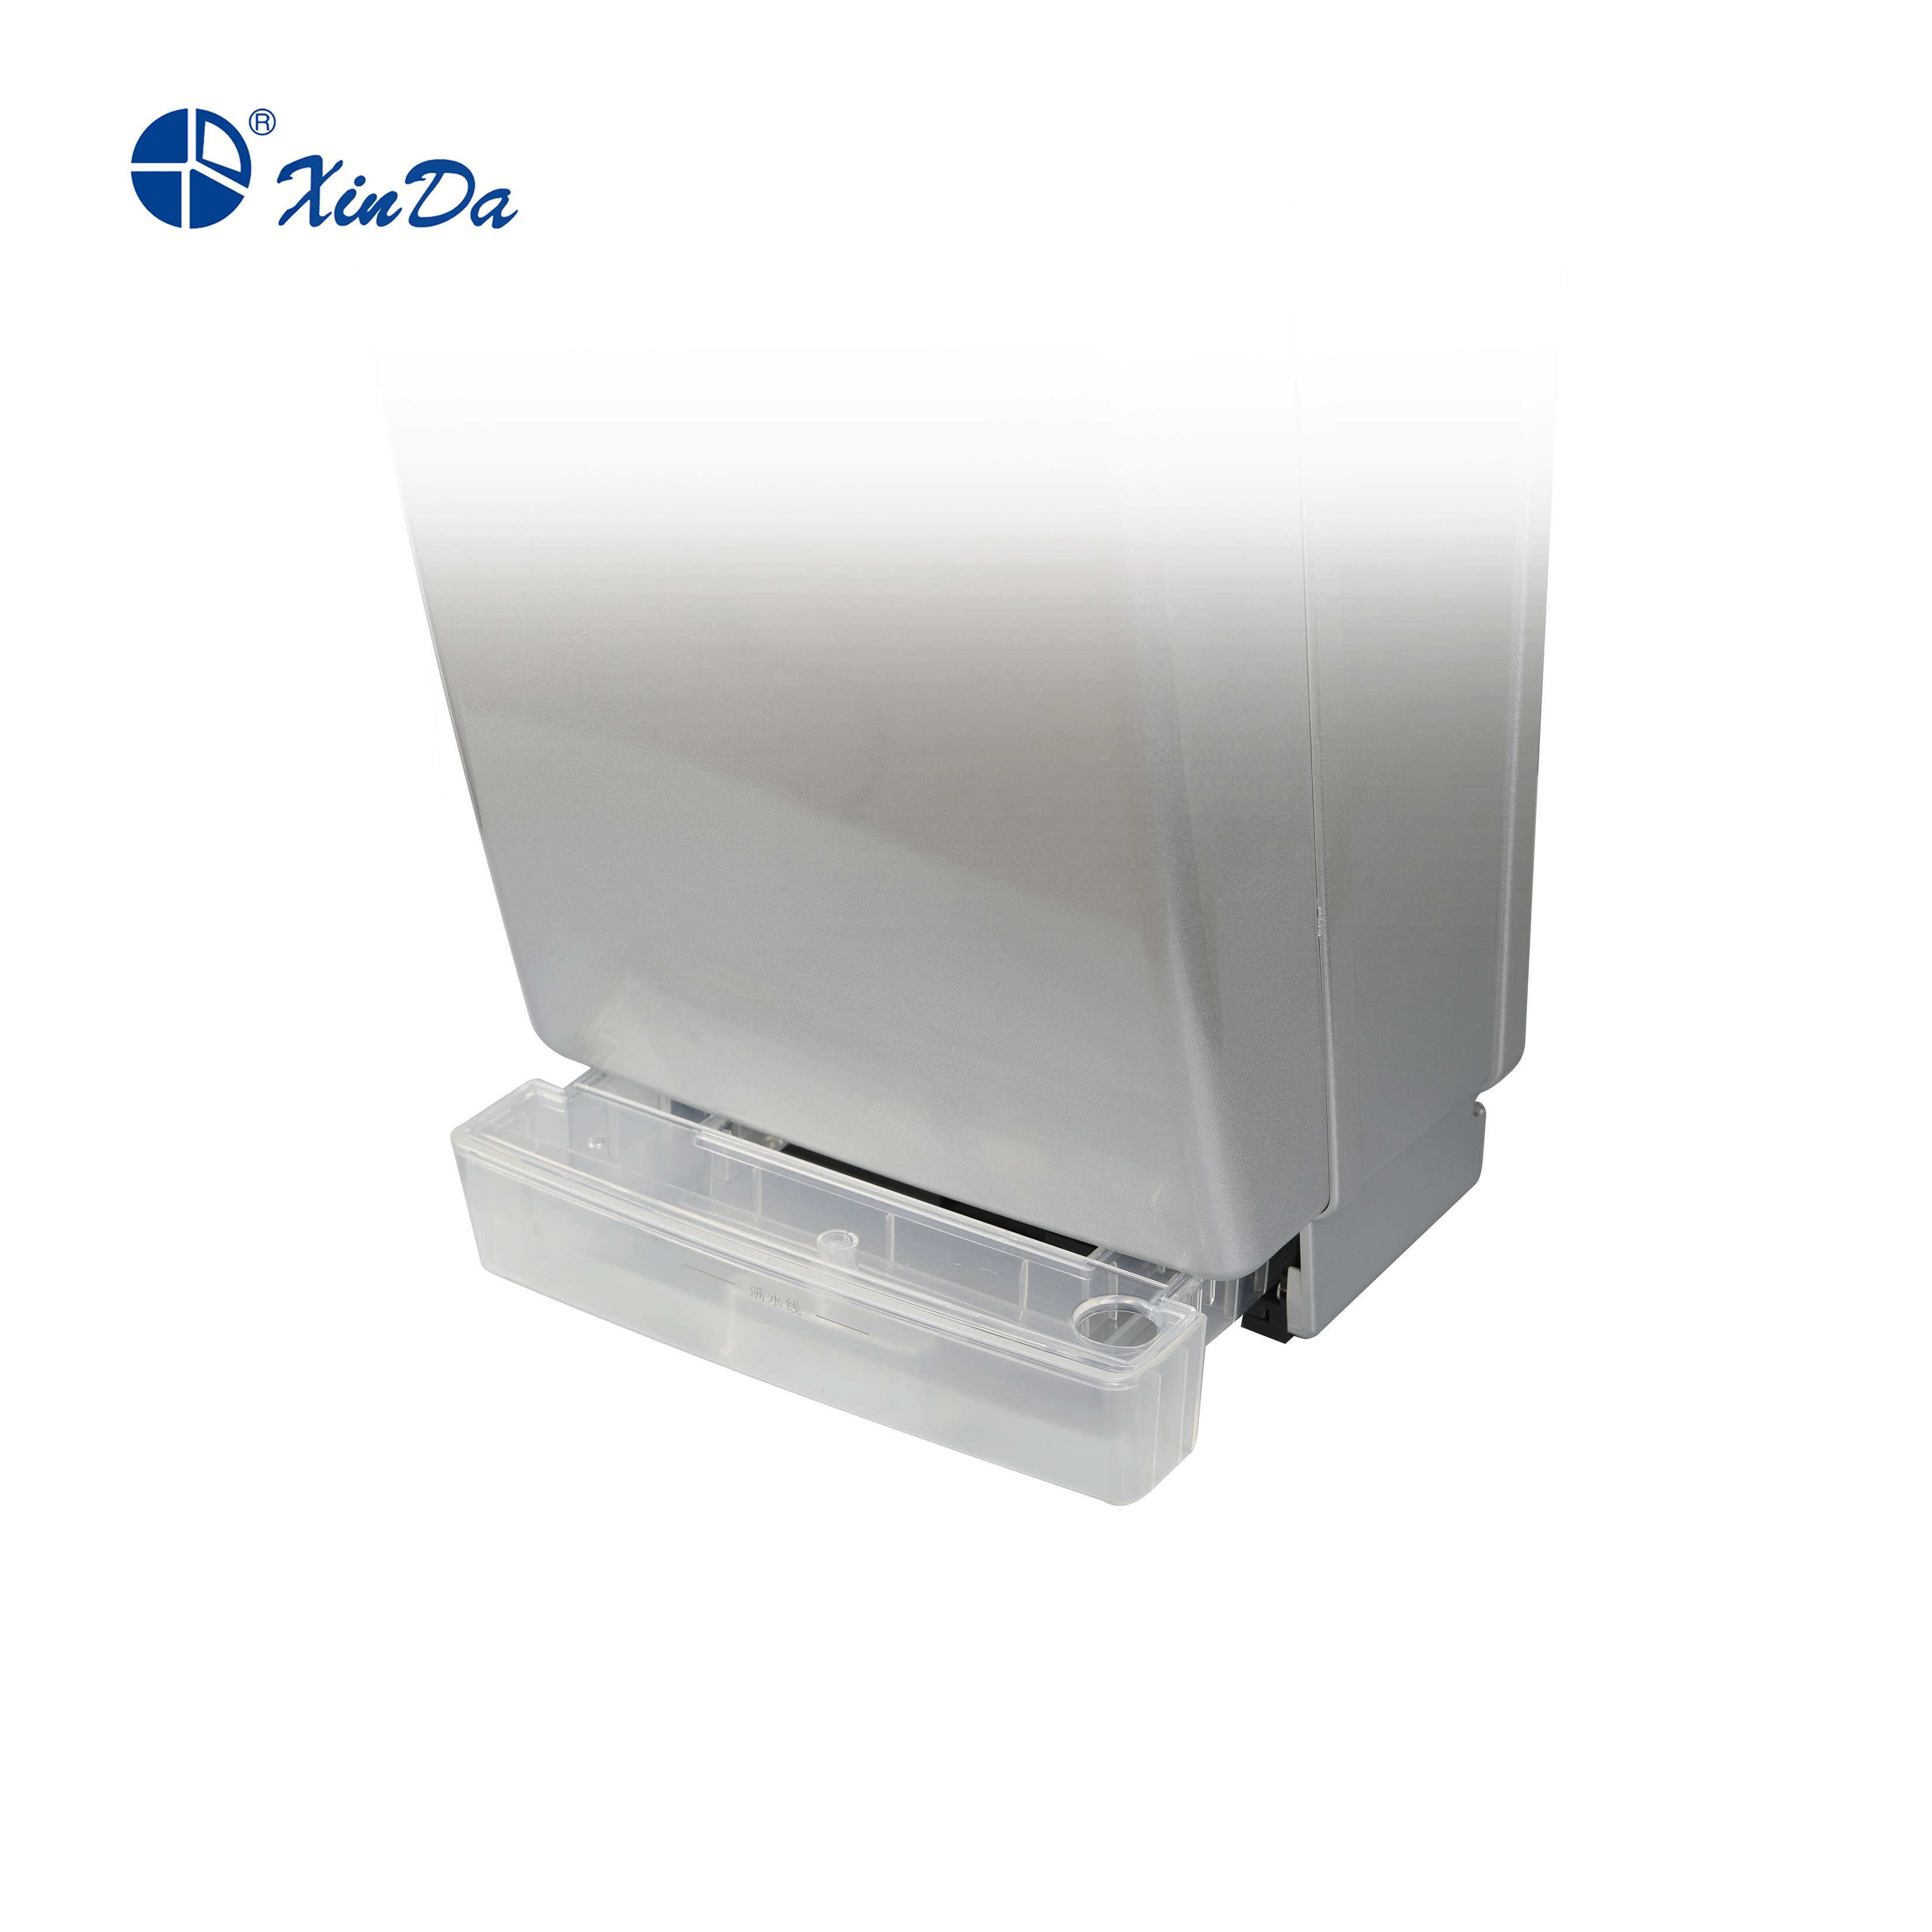 Xinda GSQ 70A ABS Silver BLDC China Professional Jet Hand Dryer Automatic Infrared Sensor with Air Filter Fiber and Water Tank